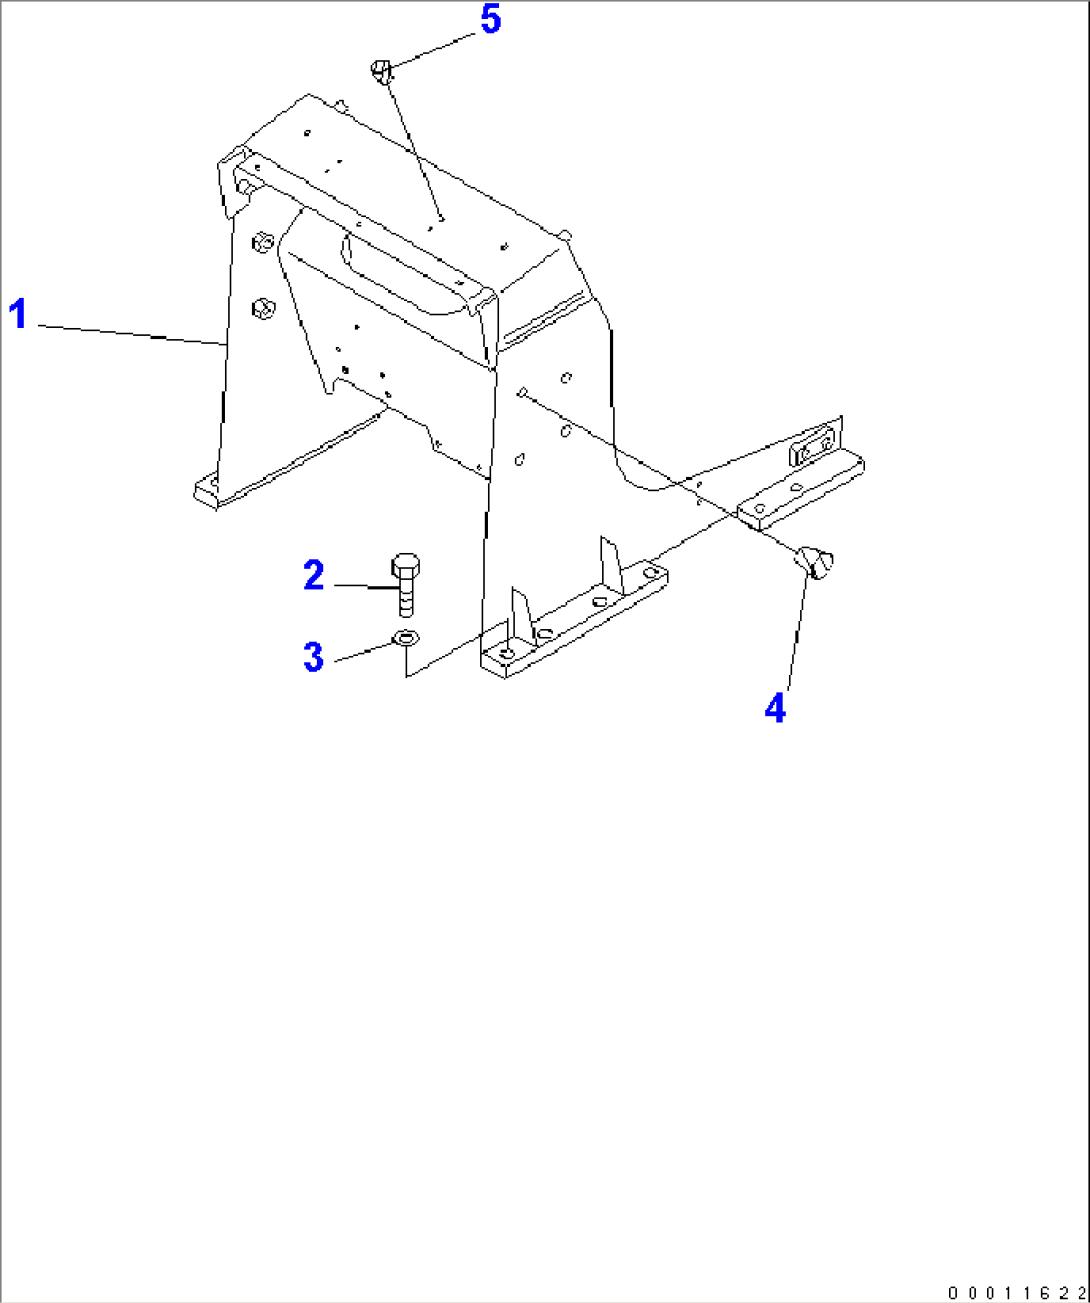 SIDE FRAME (FOR ANGLE DOZER) (FOR 2 LEVERS STEERING)